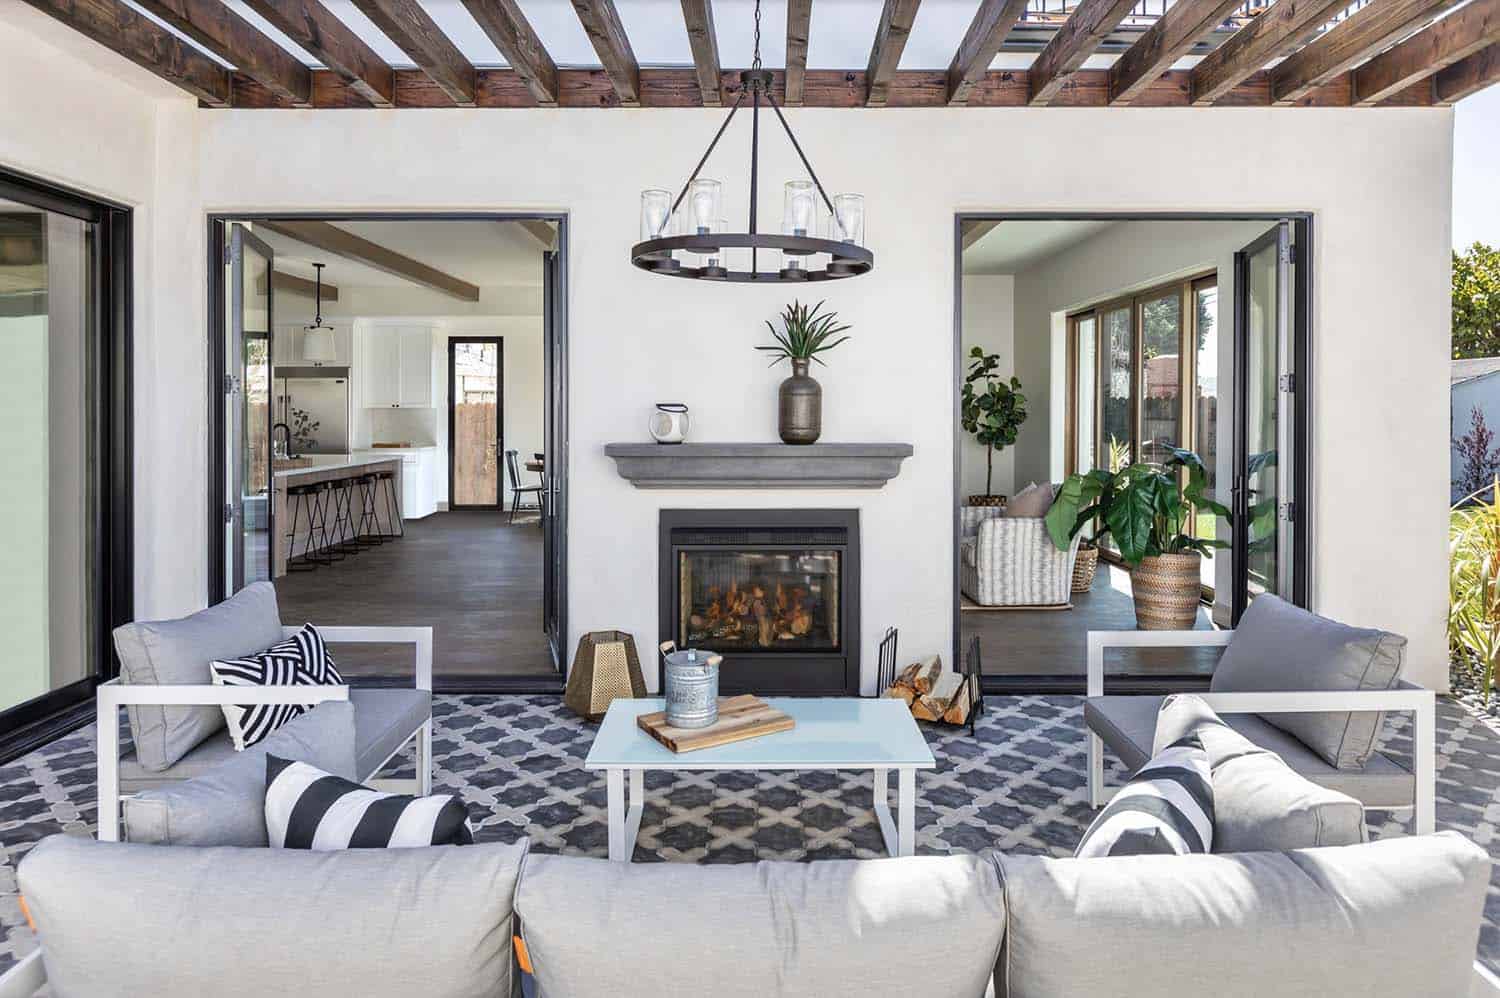 Mediterranean style patio with a fireplace and graphic patterned tile flooring